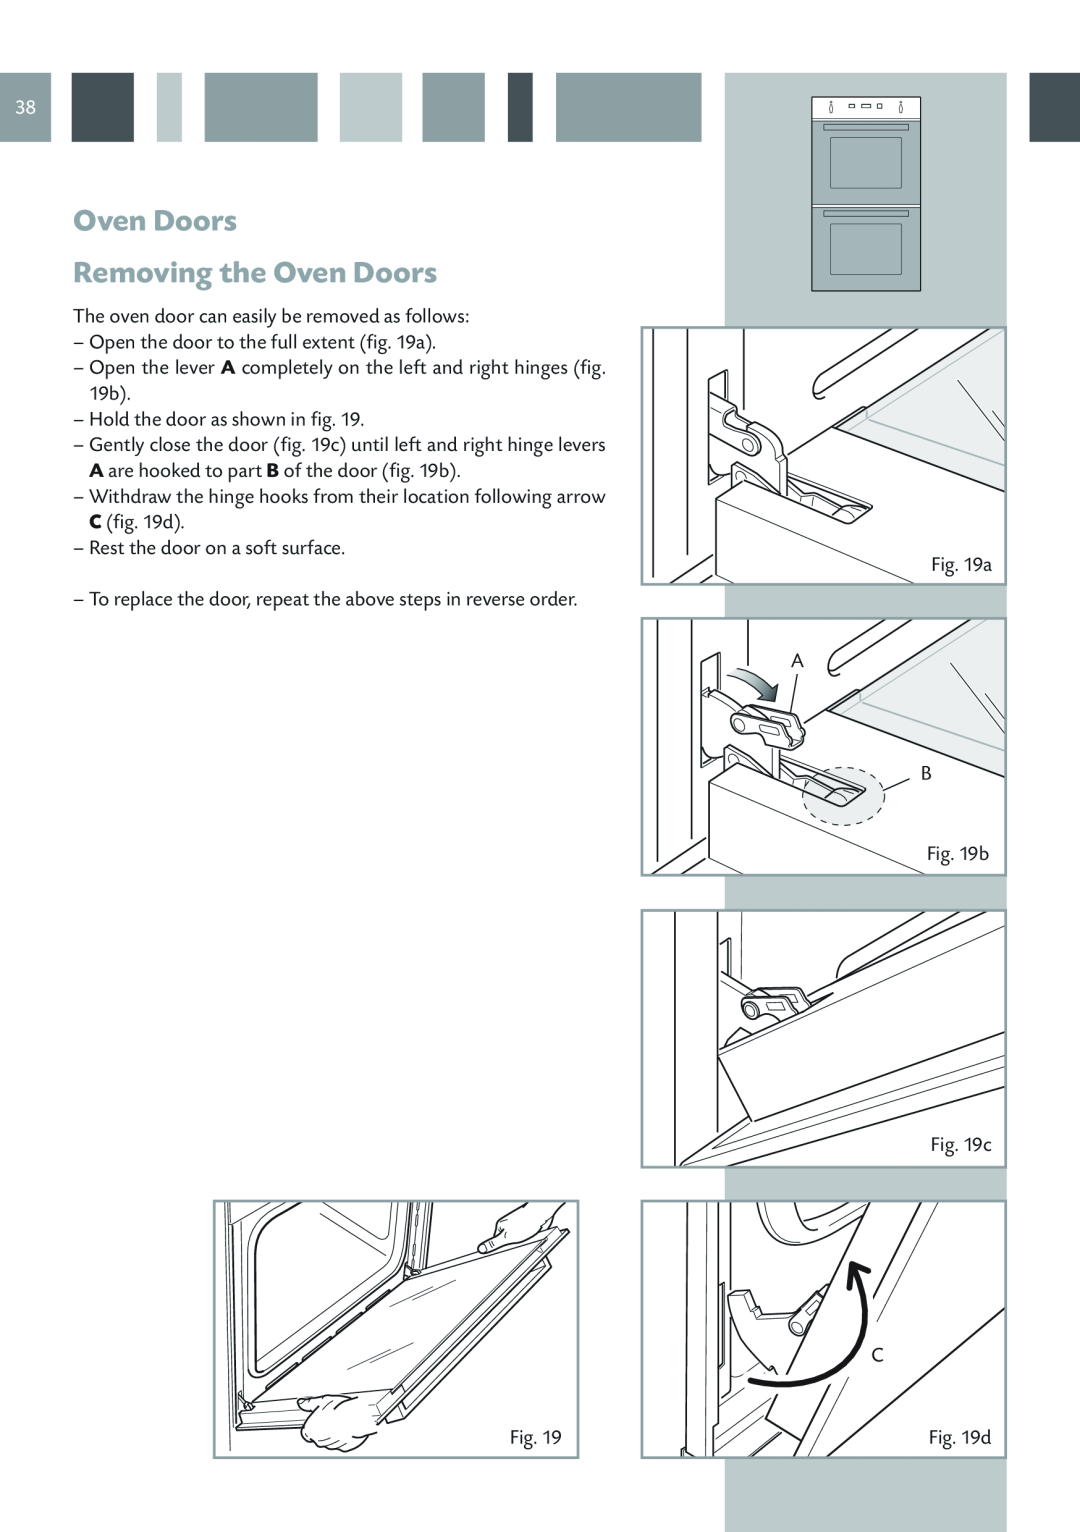 CDA 11Z6 manual Oven Doors Removing the Oven Doors, To replace the door, repeat the above steps in reverse order 